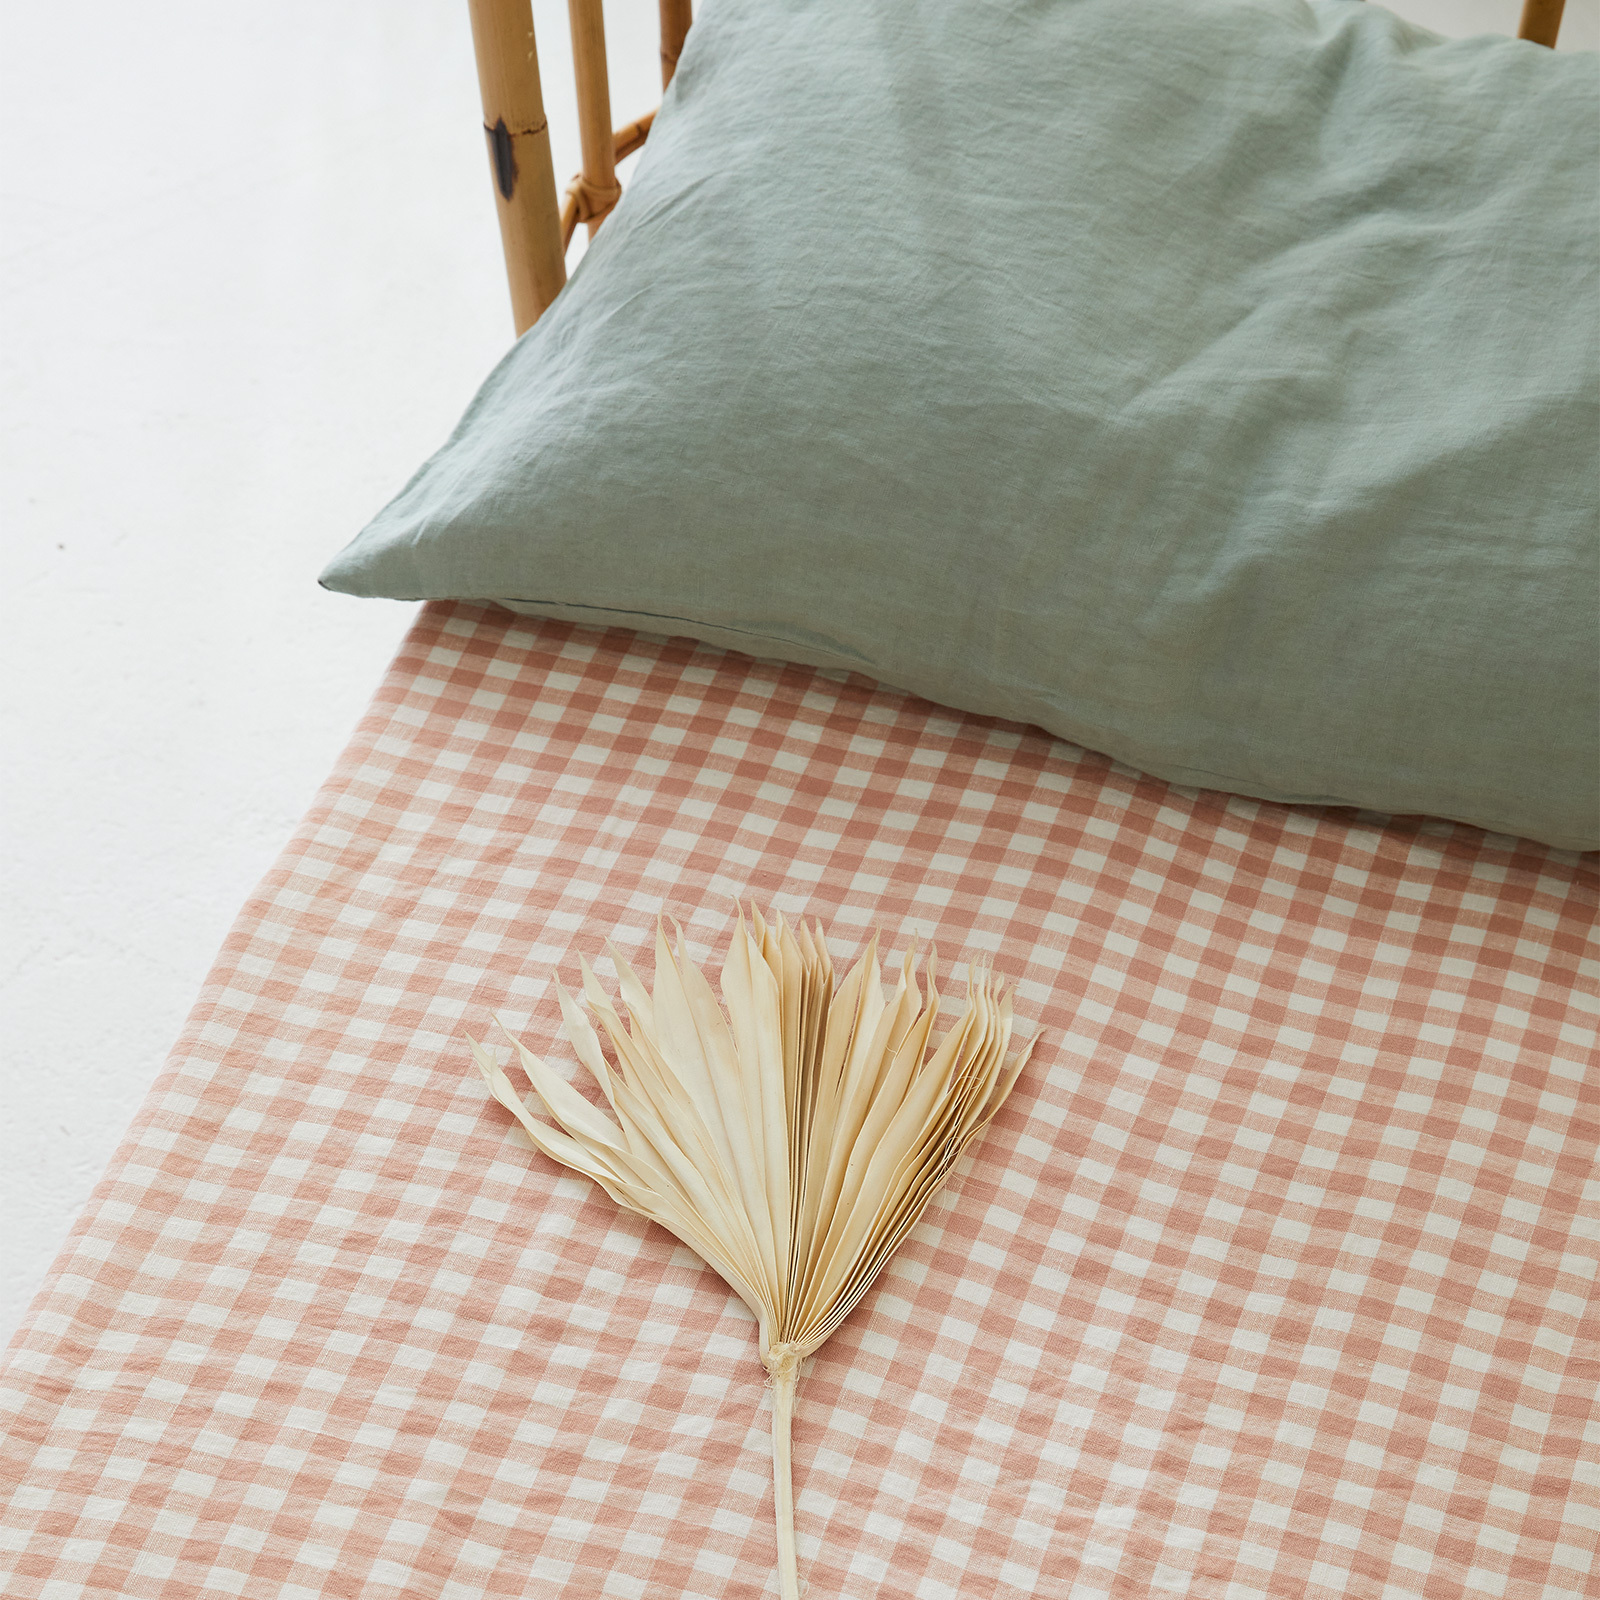 CLAY Gingham French linen Cot Sheet